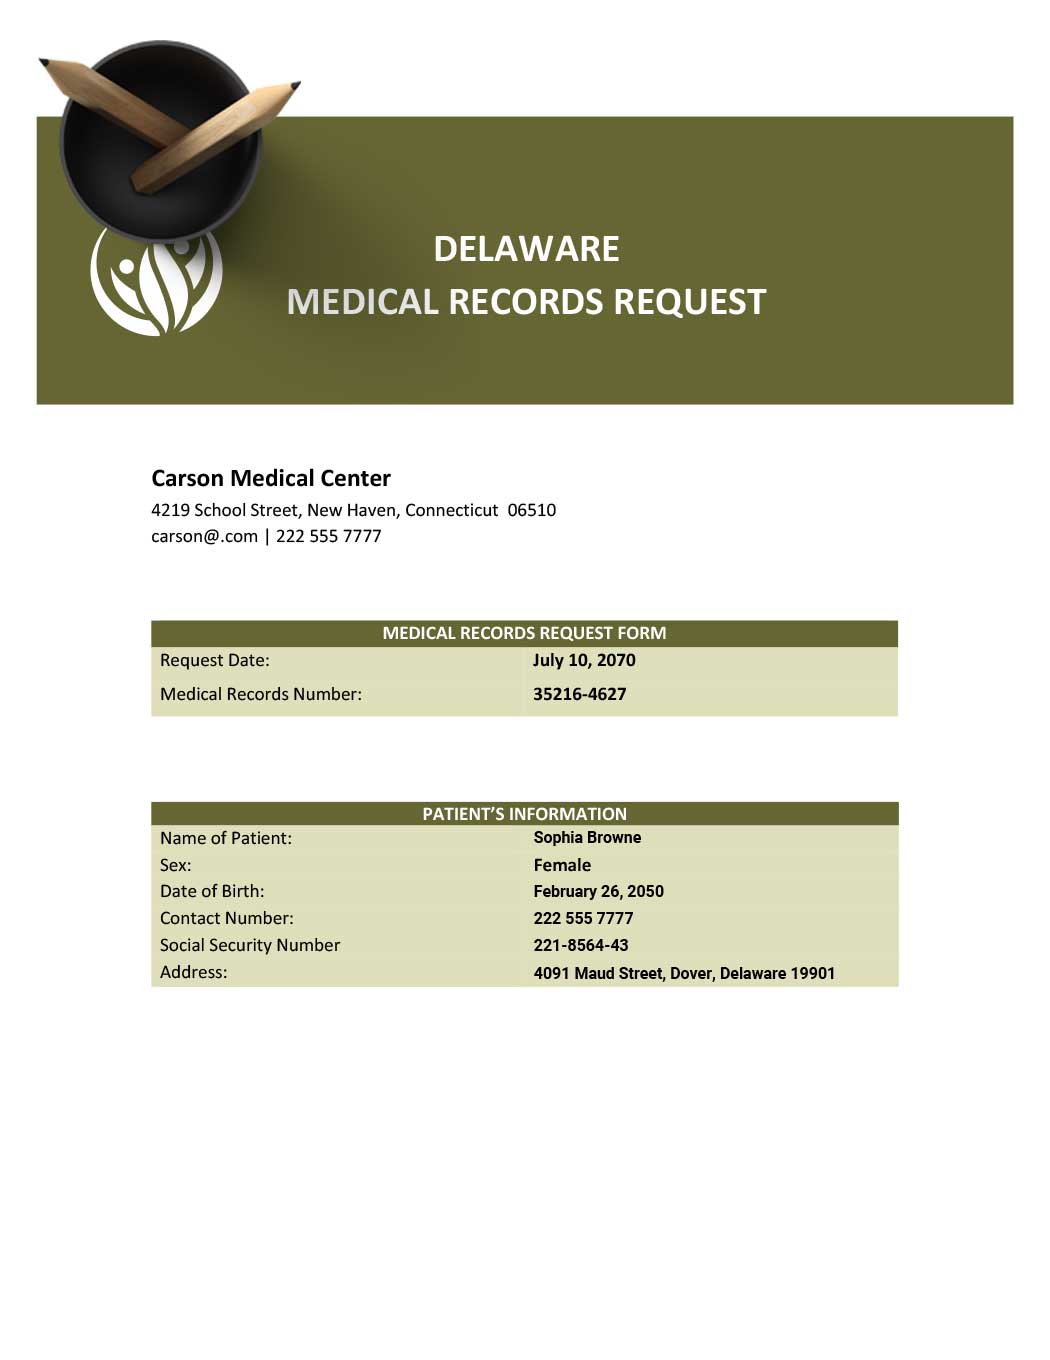 Delaware Medical Records Request Template